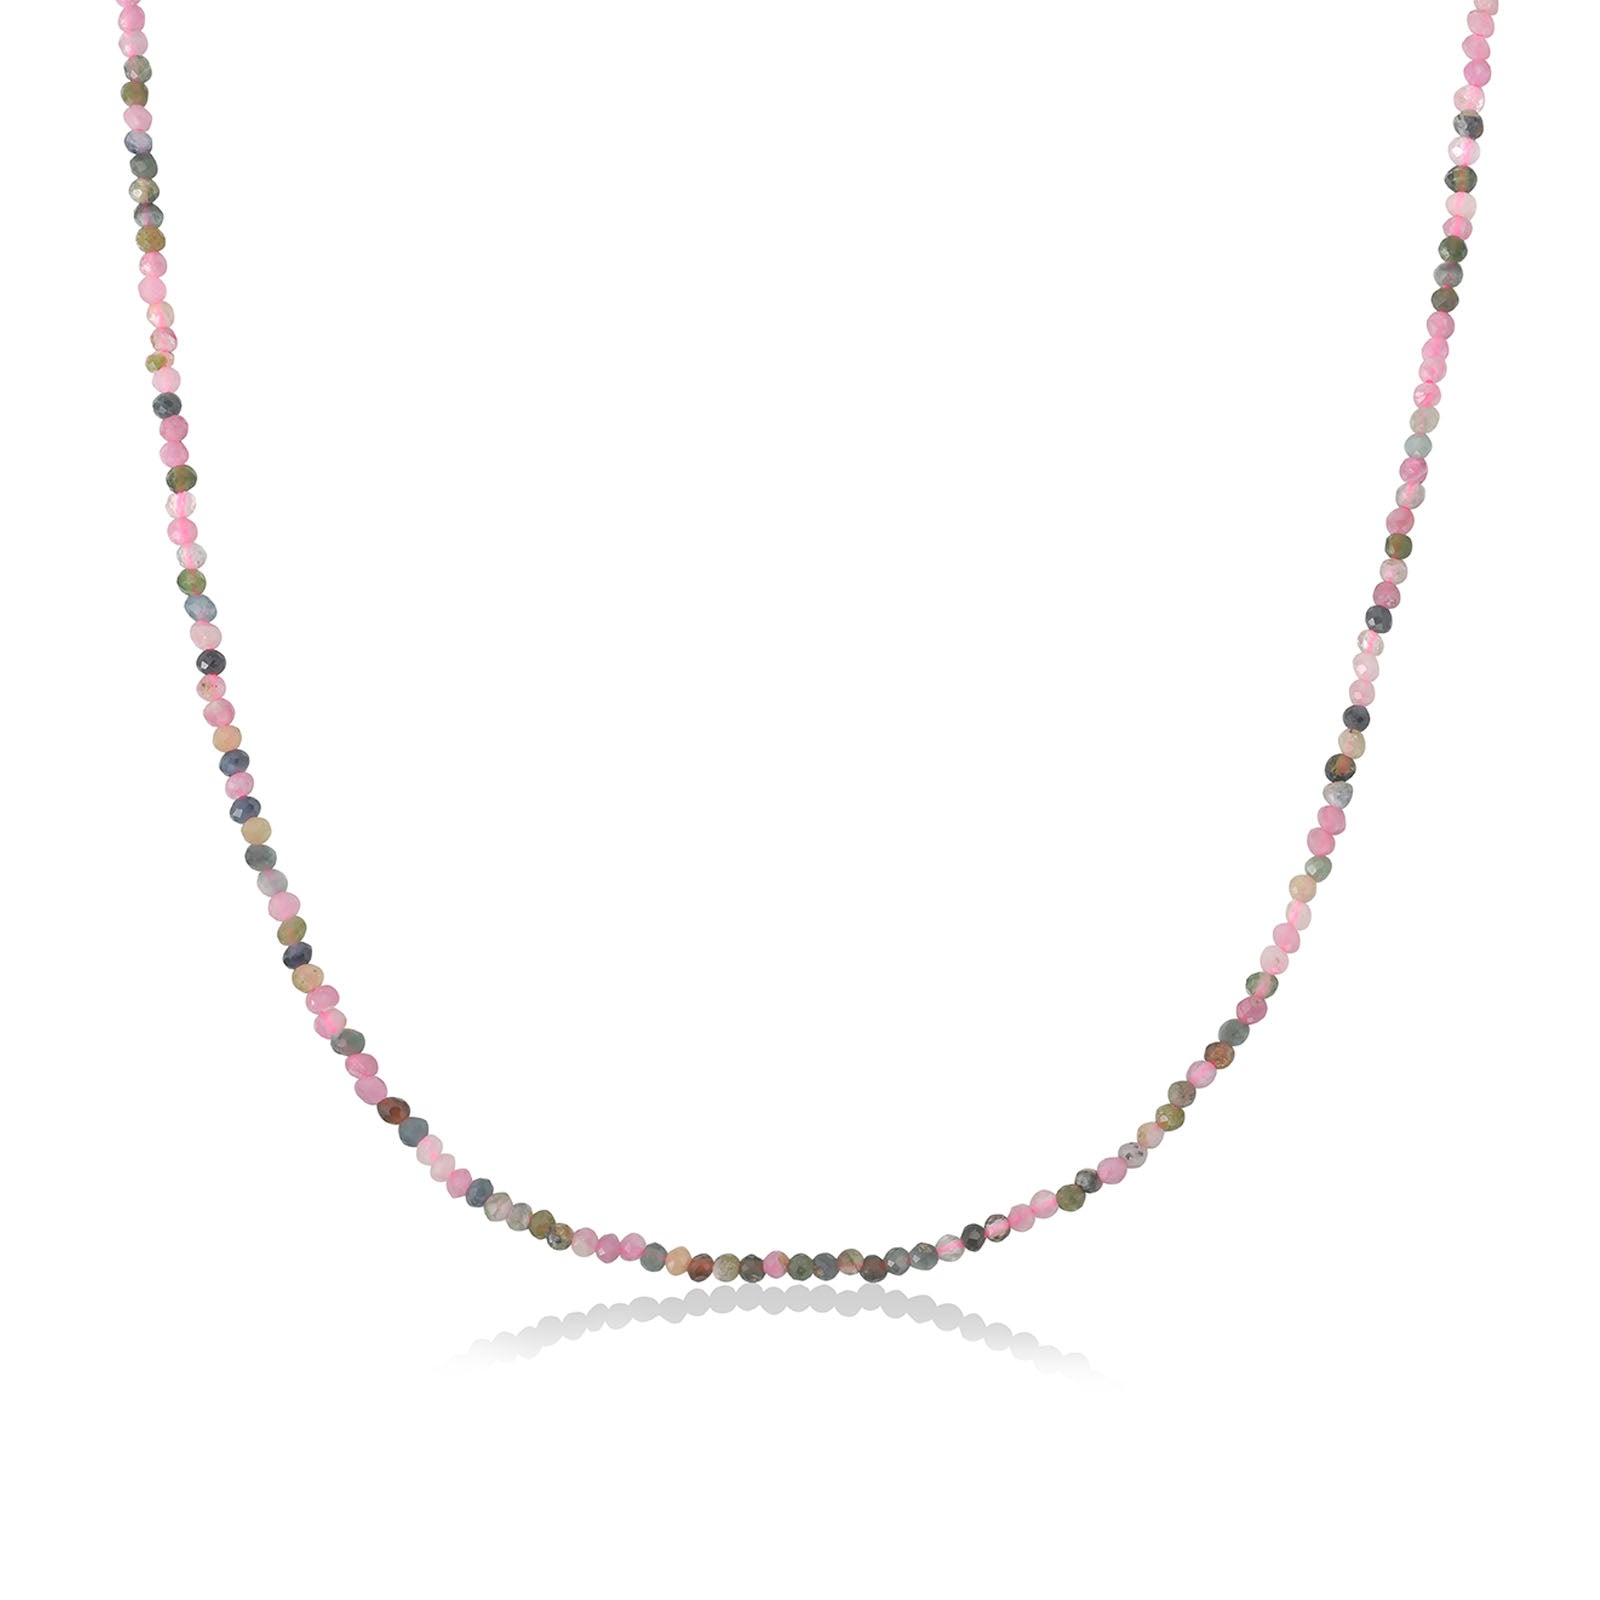 Shimmering beaded necklace made of 2mm faceted opals in shades of pink, green, light blue, and white on a gold linking lobster clasp.